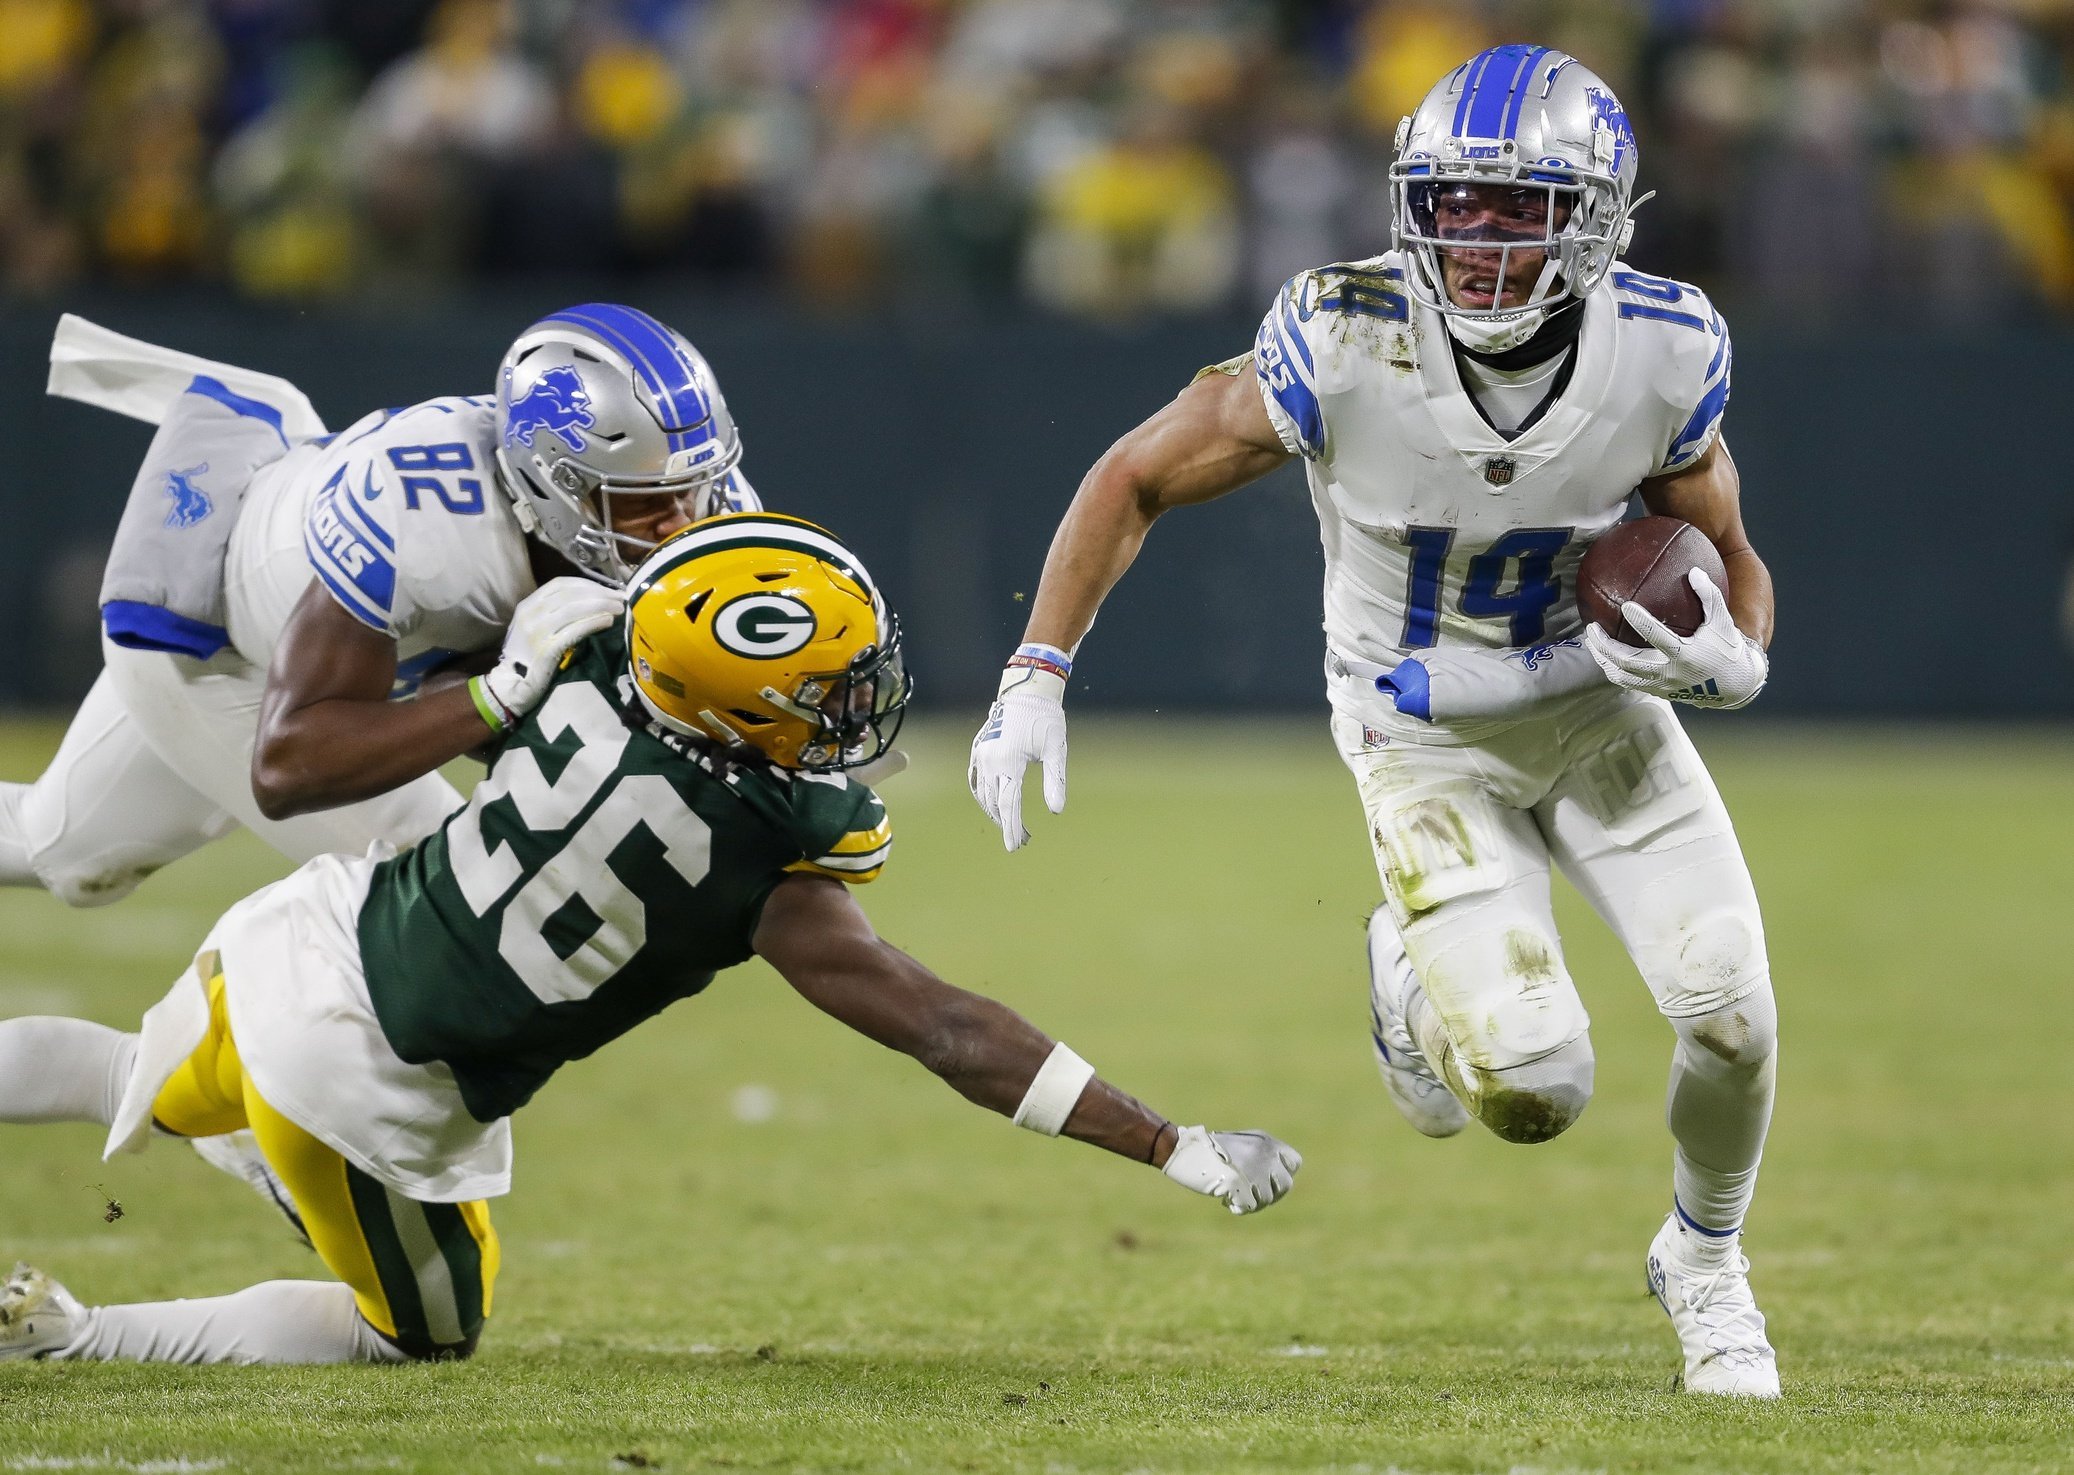 Fantasy Football: 2023 dynasty rookies in high upside situations - Behind  the Steel Curtain